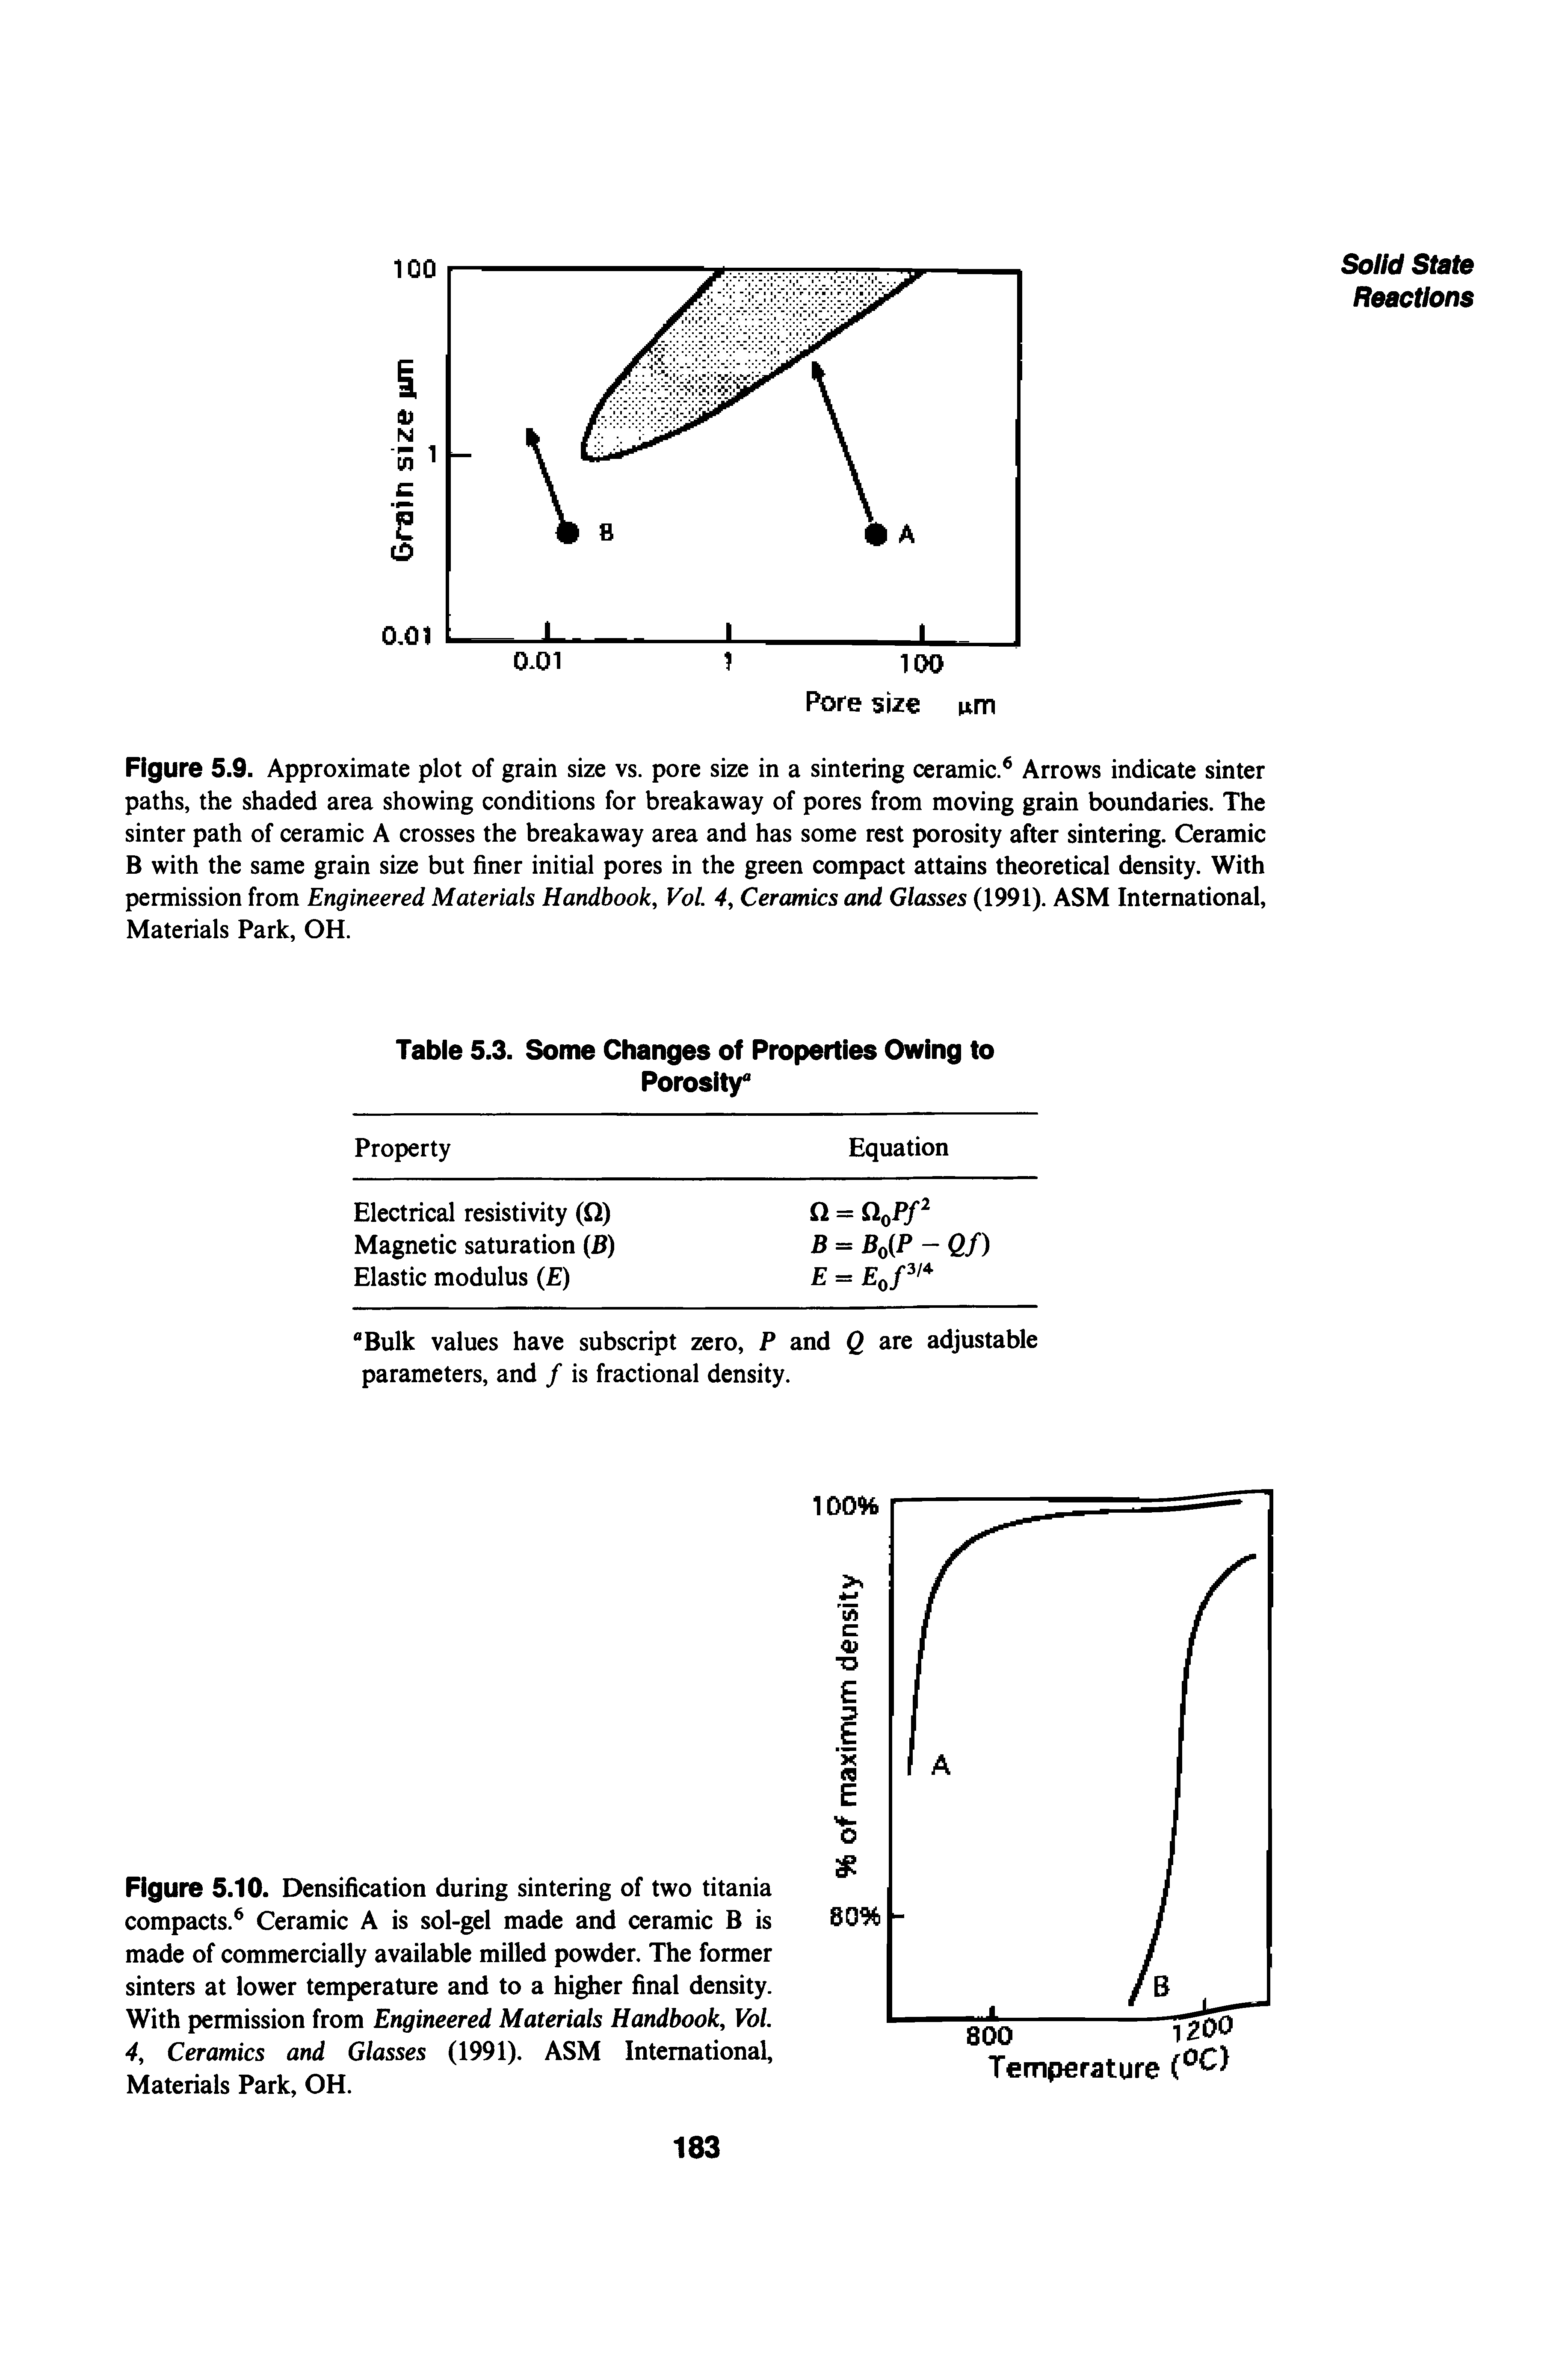 Figure 5.10. Densification during sintering of two titania compacts. Ceramic A is sol-gel made and ceramic B is made of commercially available milled powder. The former sinters at lower temperature and to a higher final density. With permission from Engineered Materials Handbook, Vol. 4, Ceramics and Glasses (1991). ASM International, Materials Park, OH.